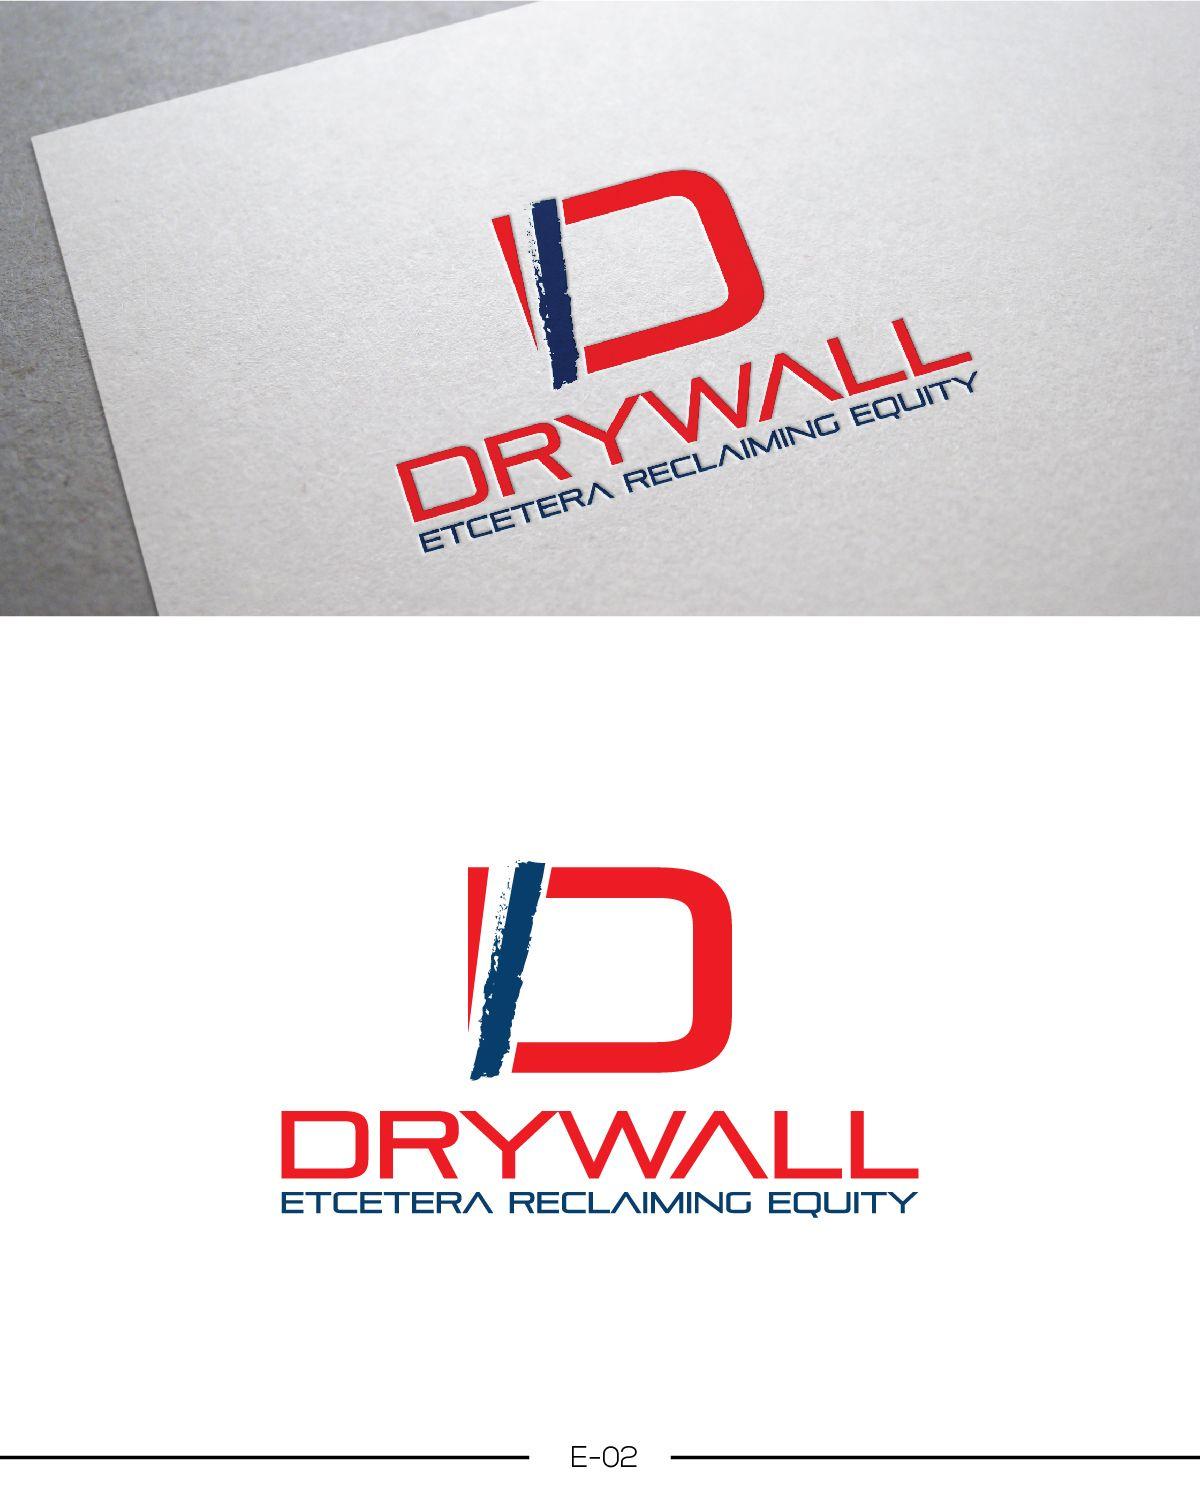 Drywall Logo - Conservative, Bold, Trade Logo Design for Drywall Etcetera ...